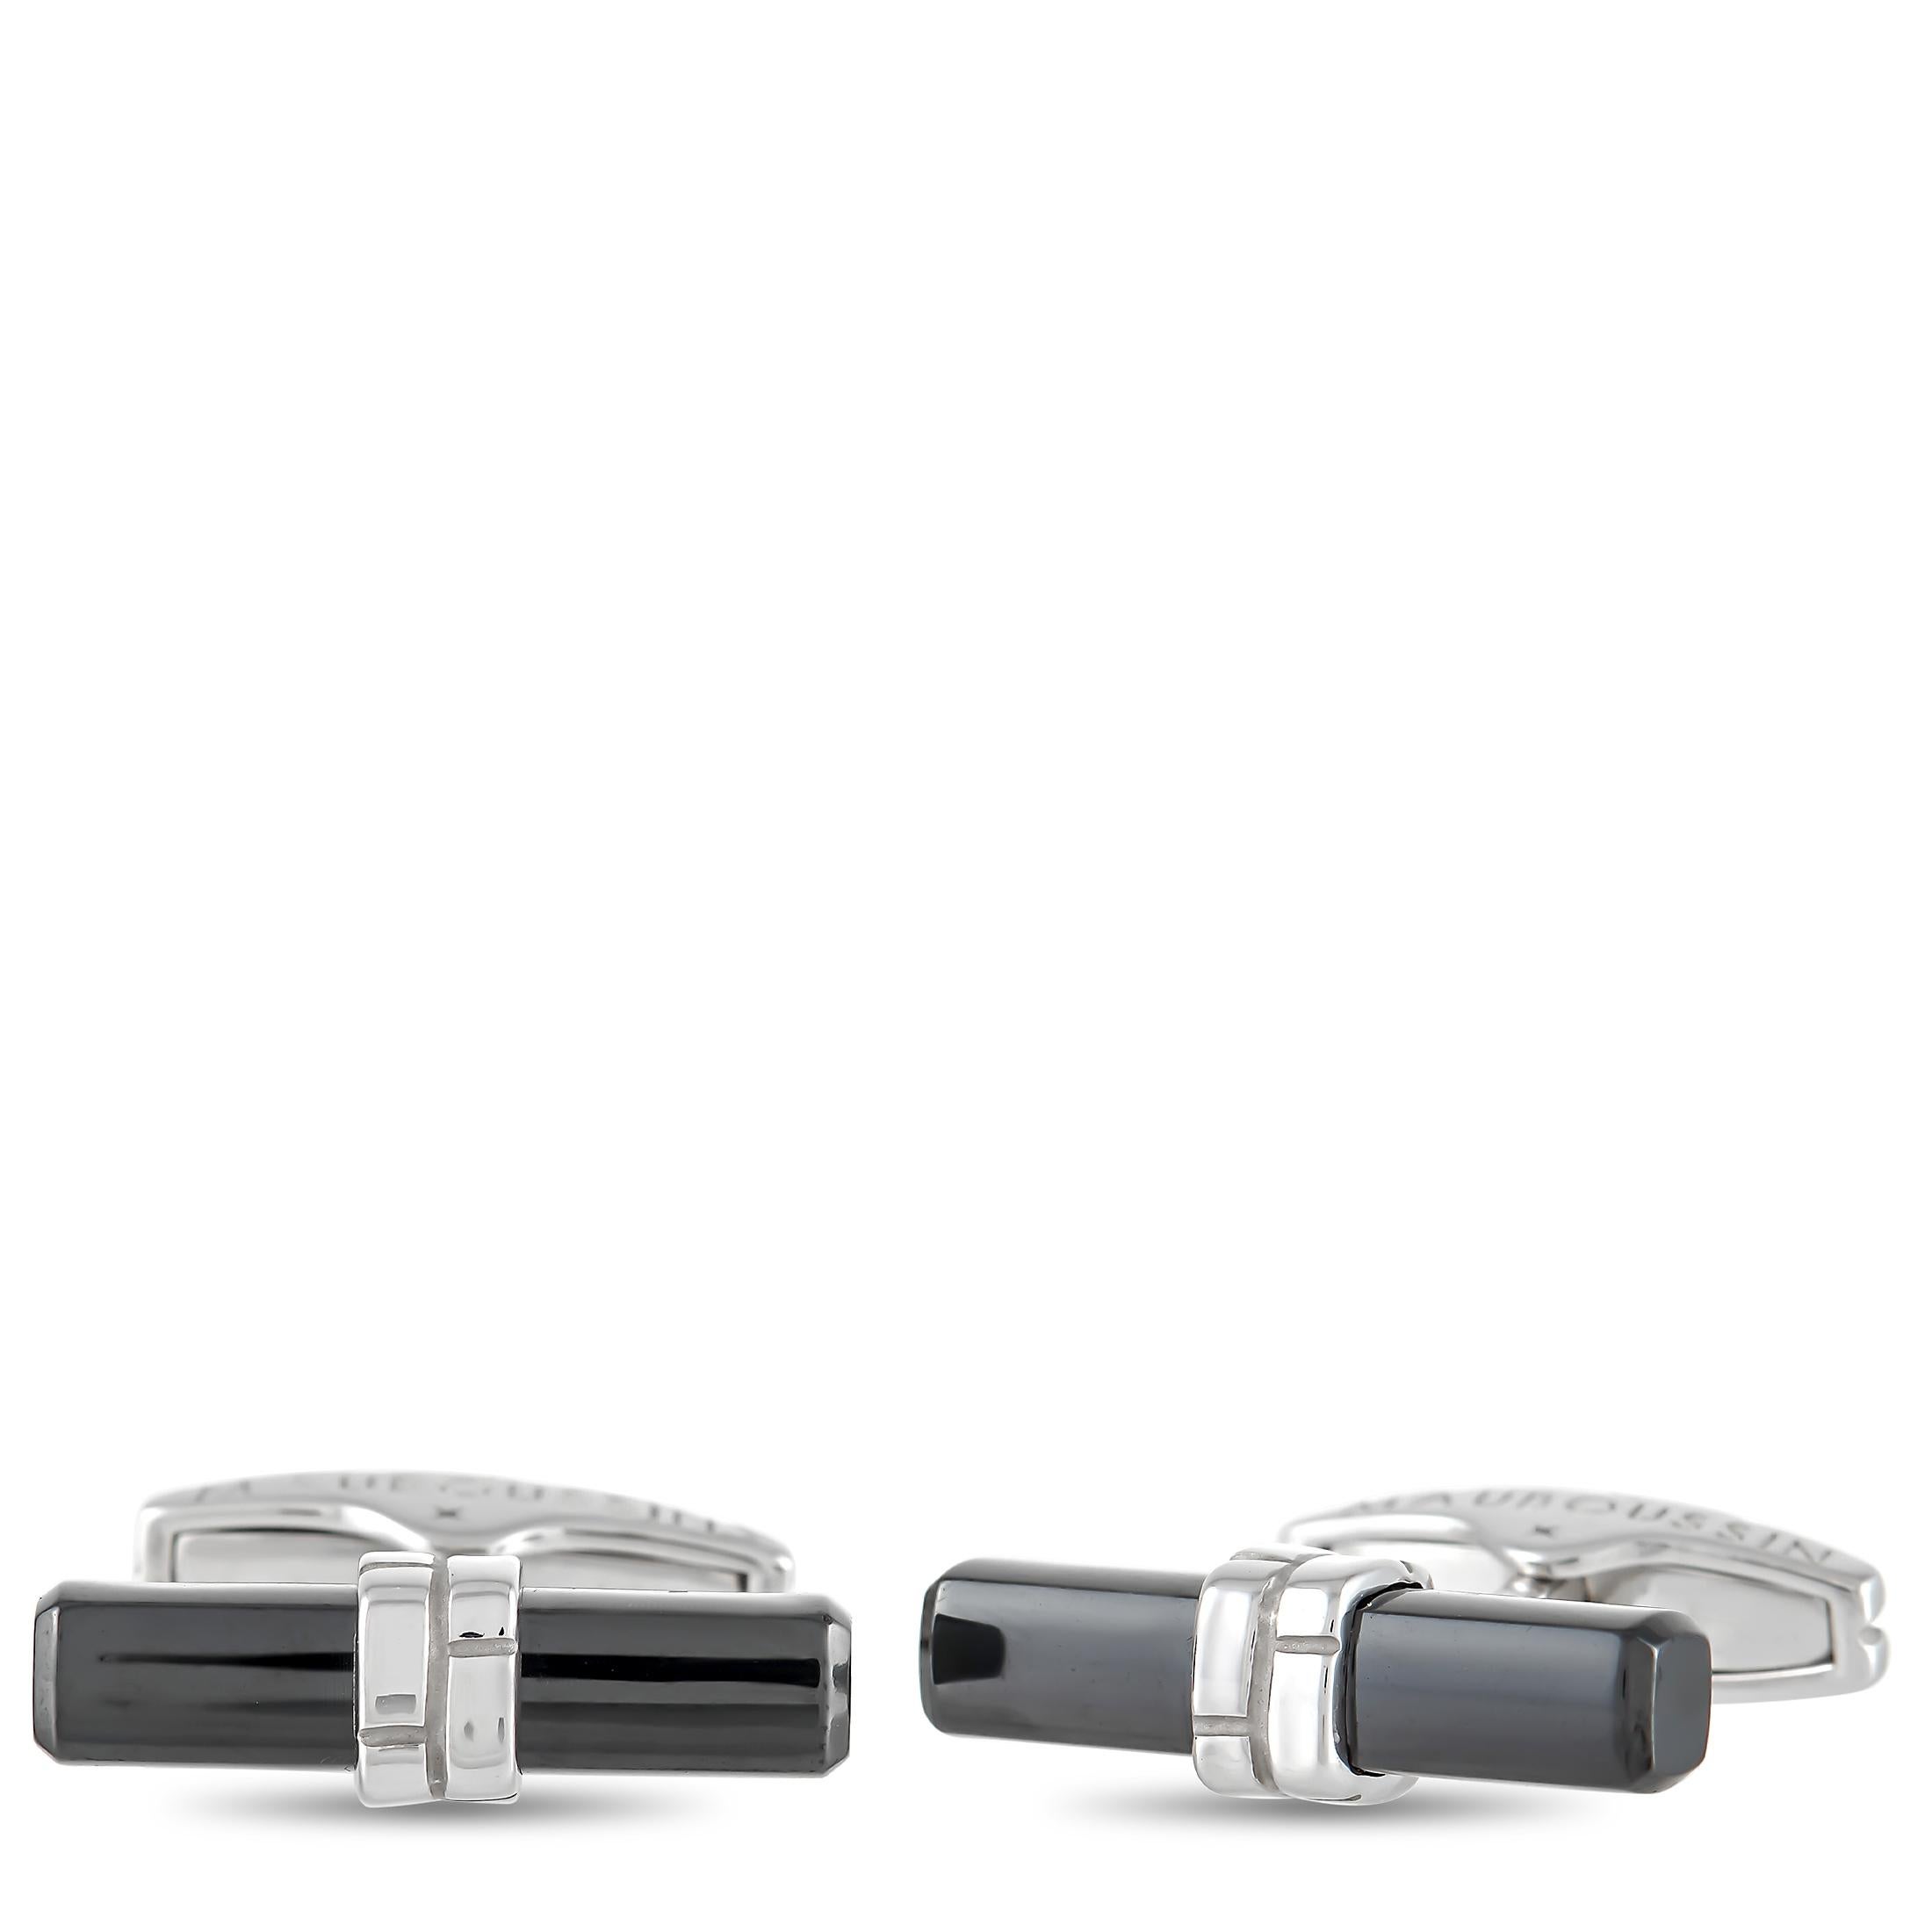 Mauboussin 18K White Gold Onyx Cufflink and Pin Set offers a stately finishing touch. The cufflinks are made with 18K white gold and feature a polished onyx stone on both. The cufflinks measure 0.25 inches in length and 0.88 inches in width. The